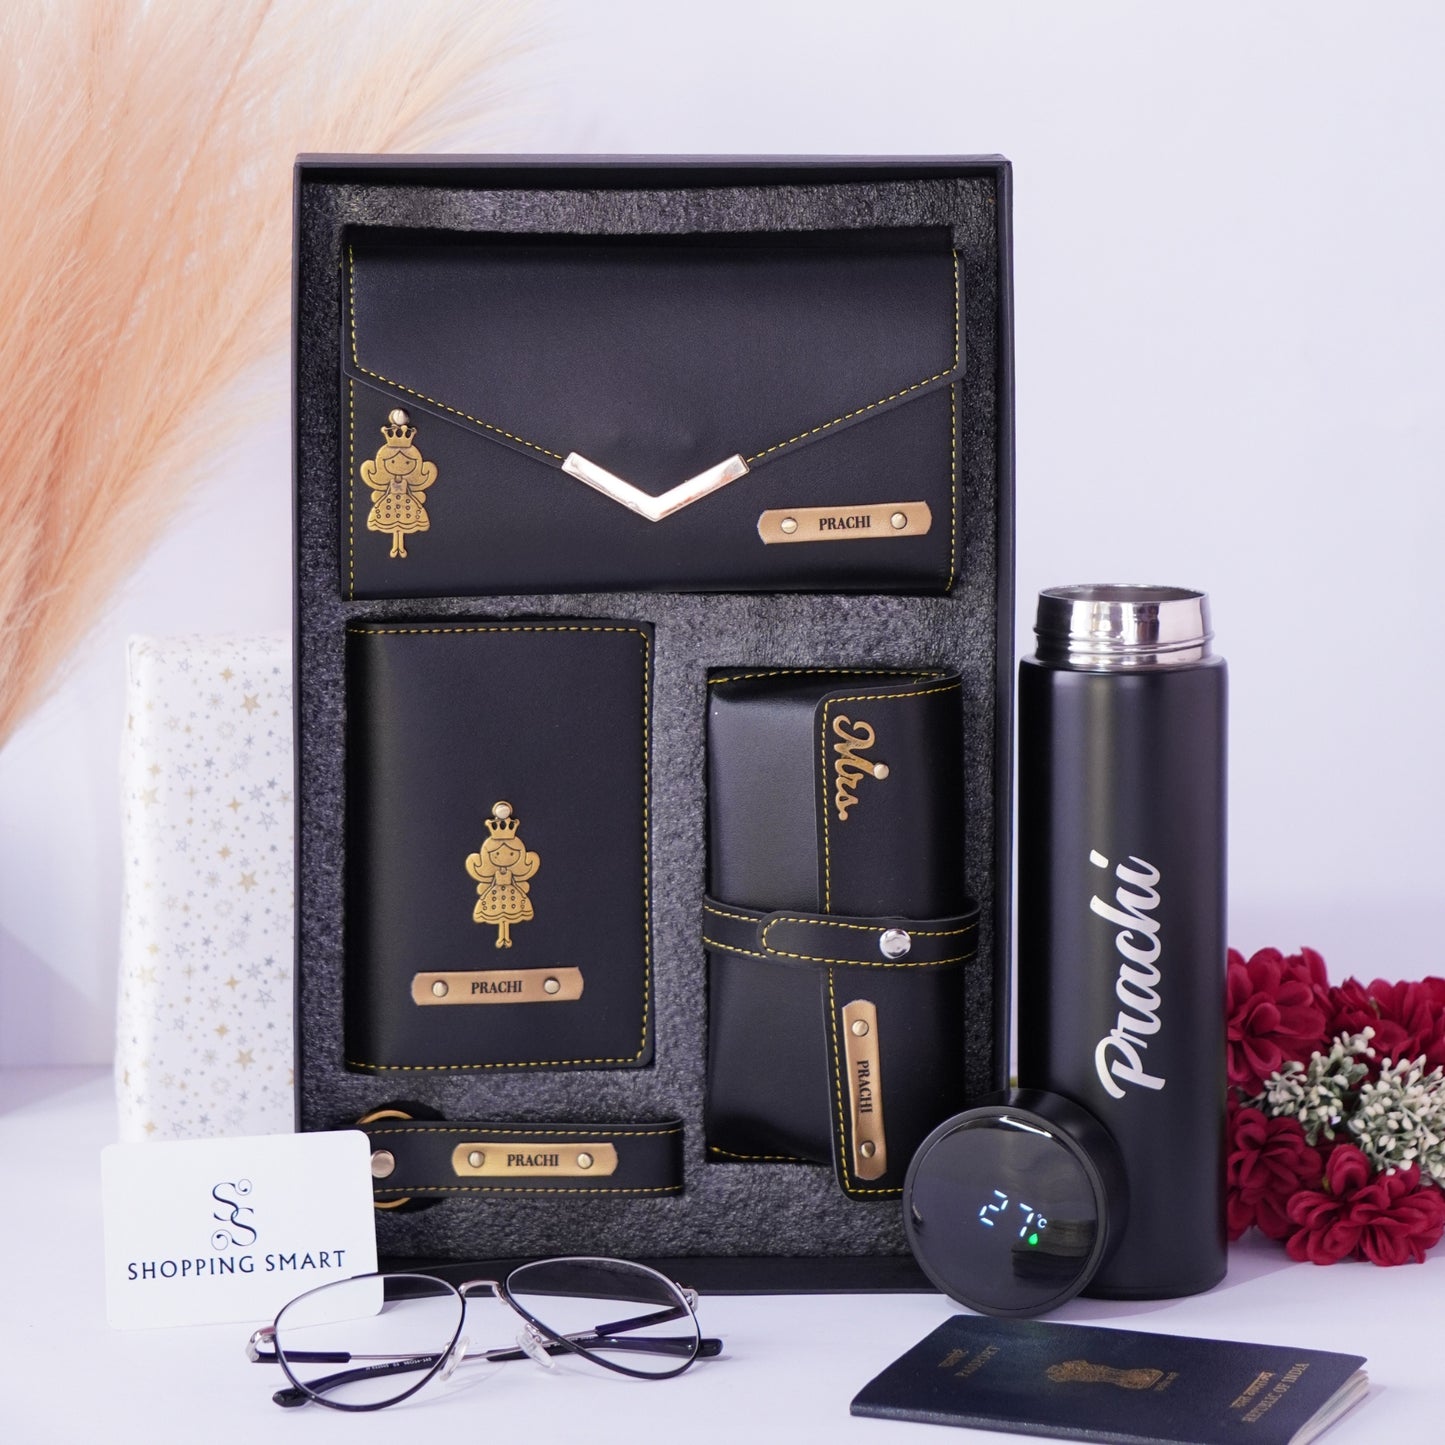 Personalized Gift Set Hamper for Women - Includes 1 Free Bottle